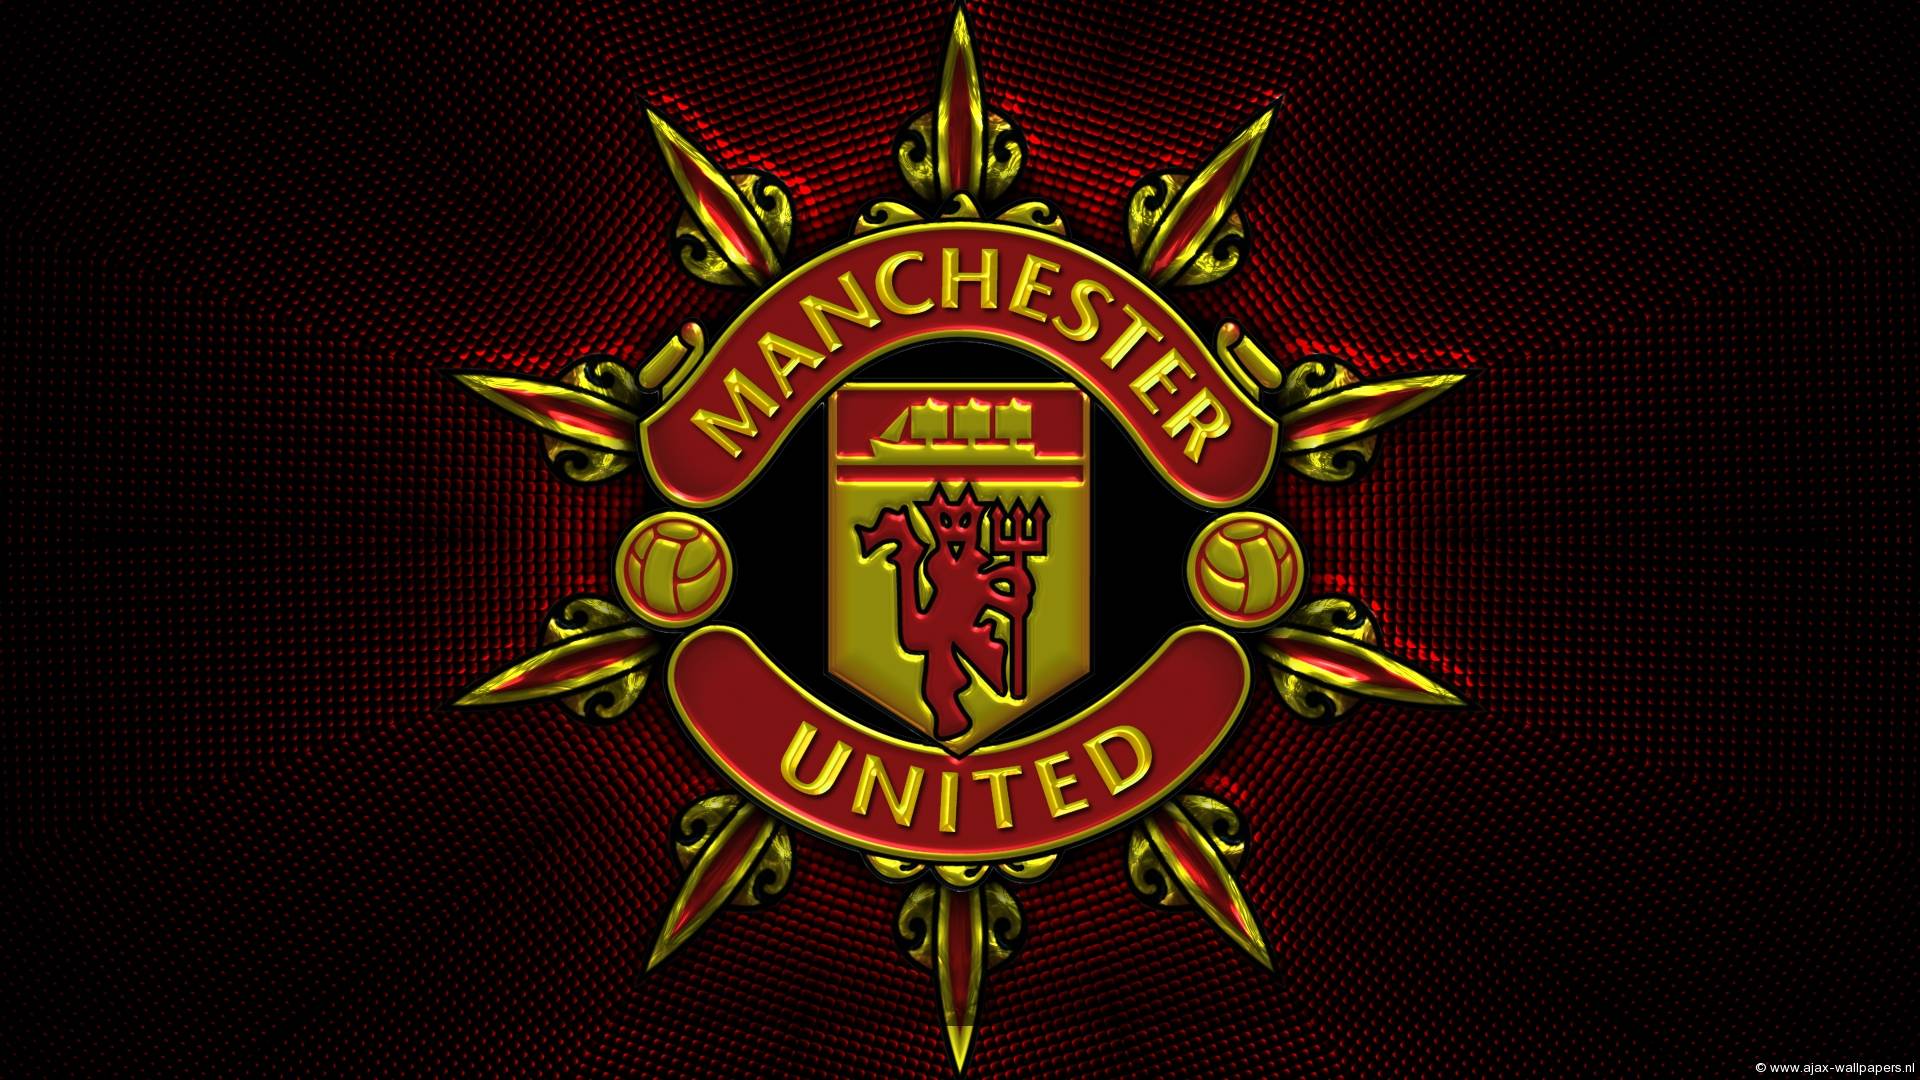 Image For > Manchester United Wallpapers Nike